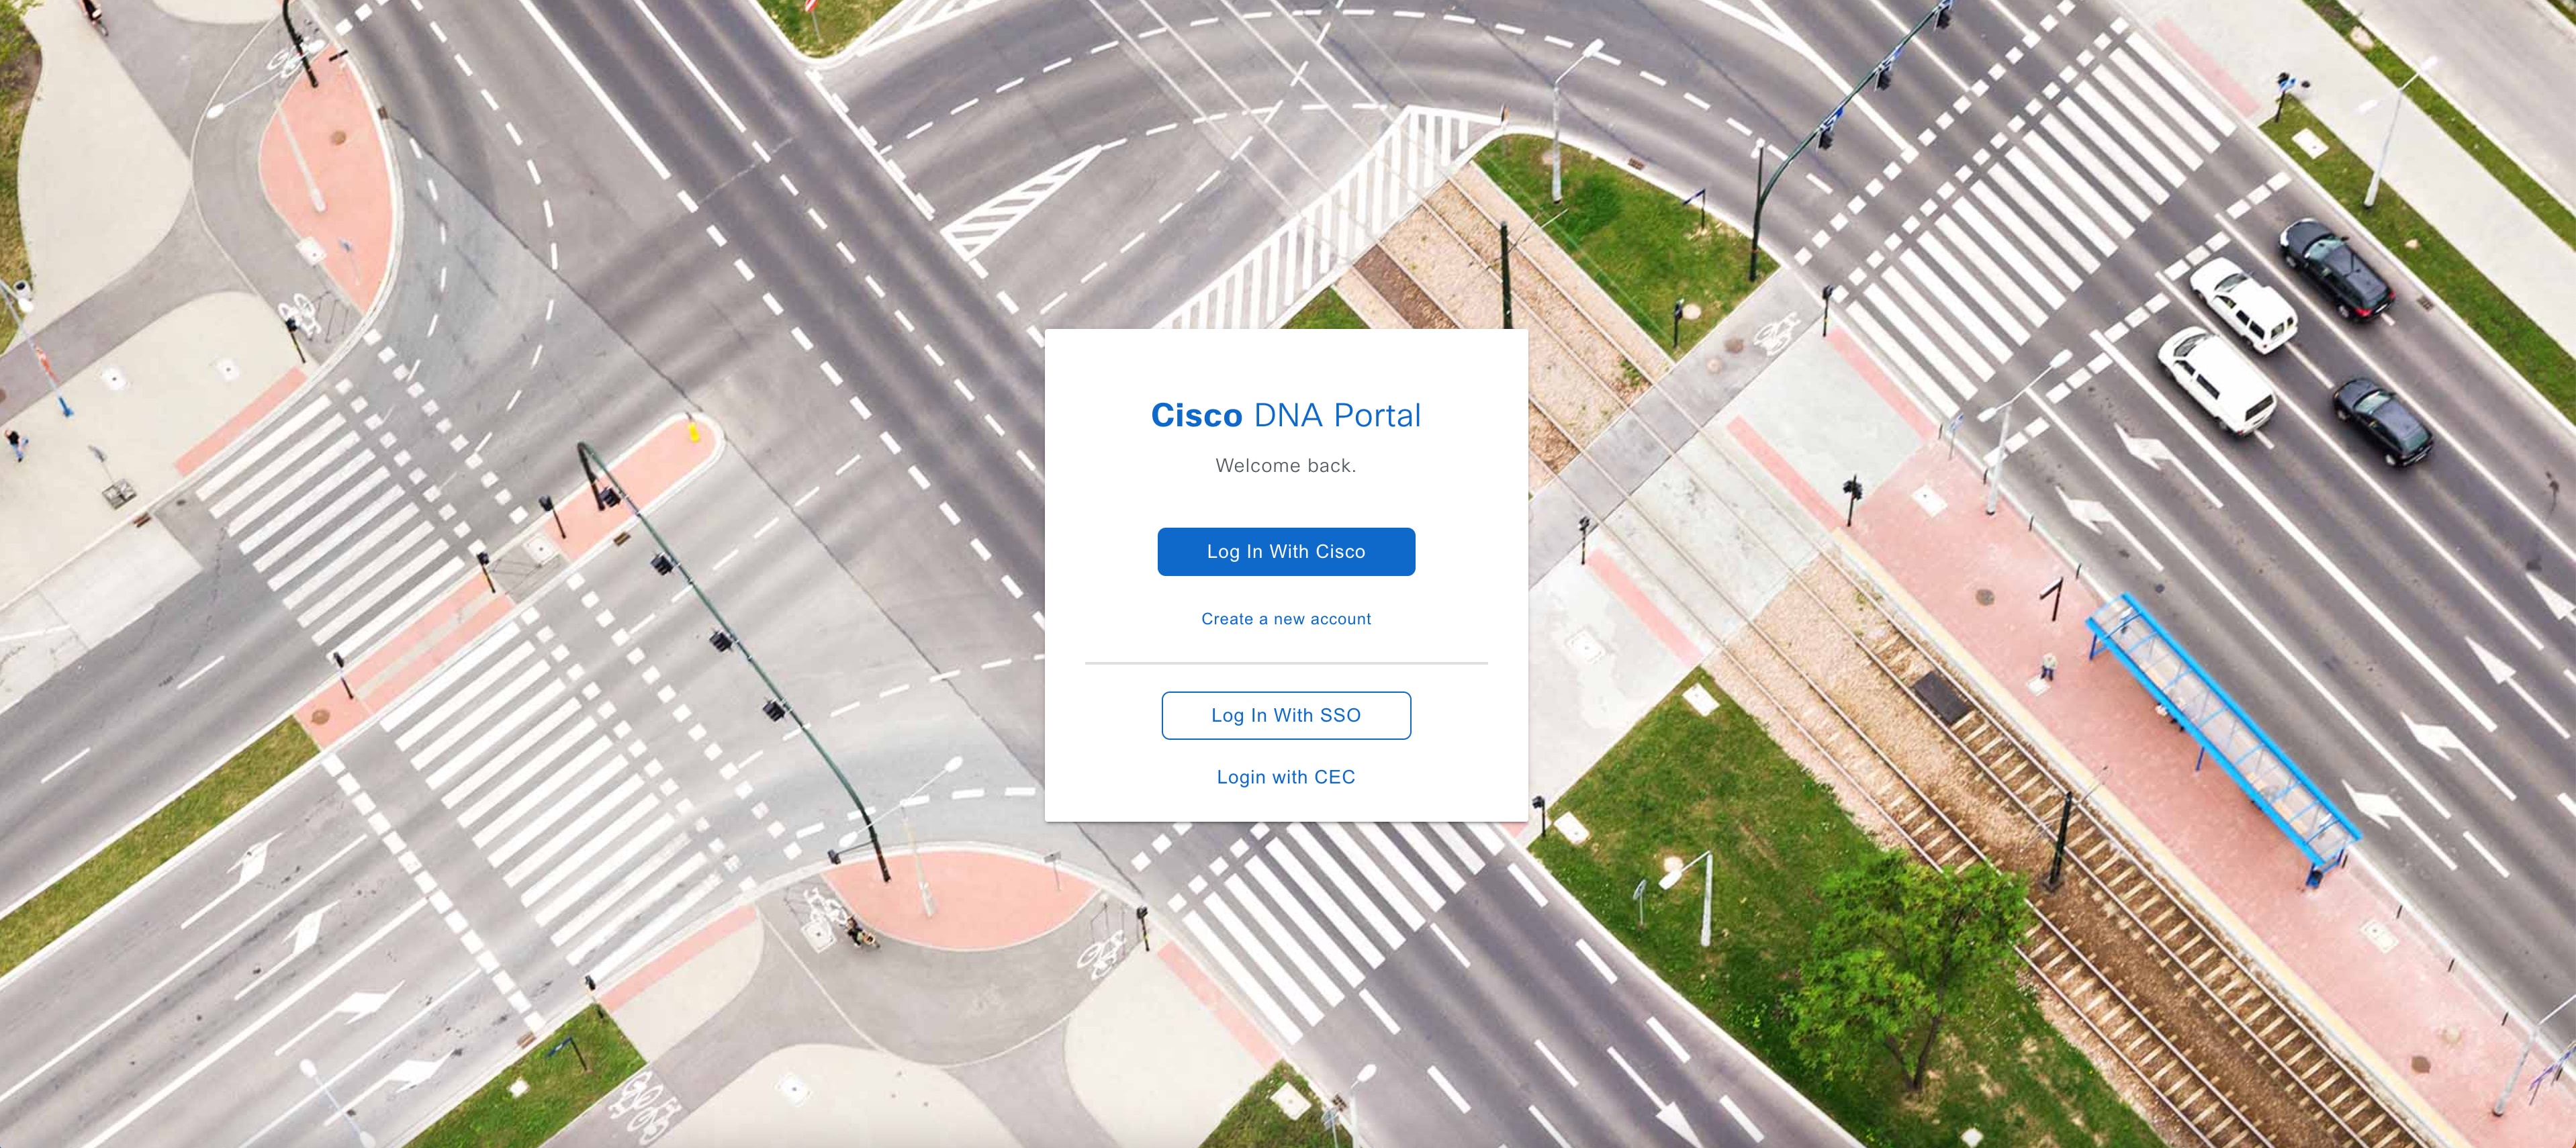 The Cisco DNA Portal login window displays the options to log in with Cisco or create a new account.